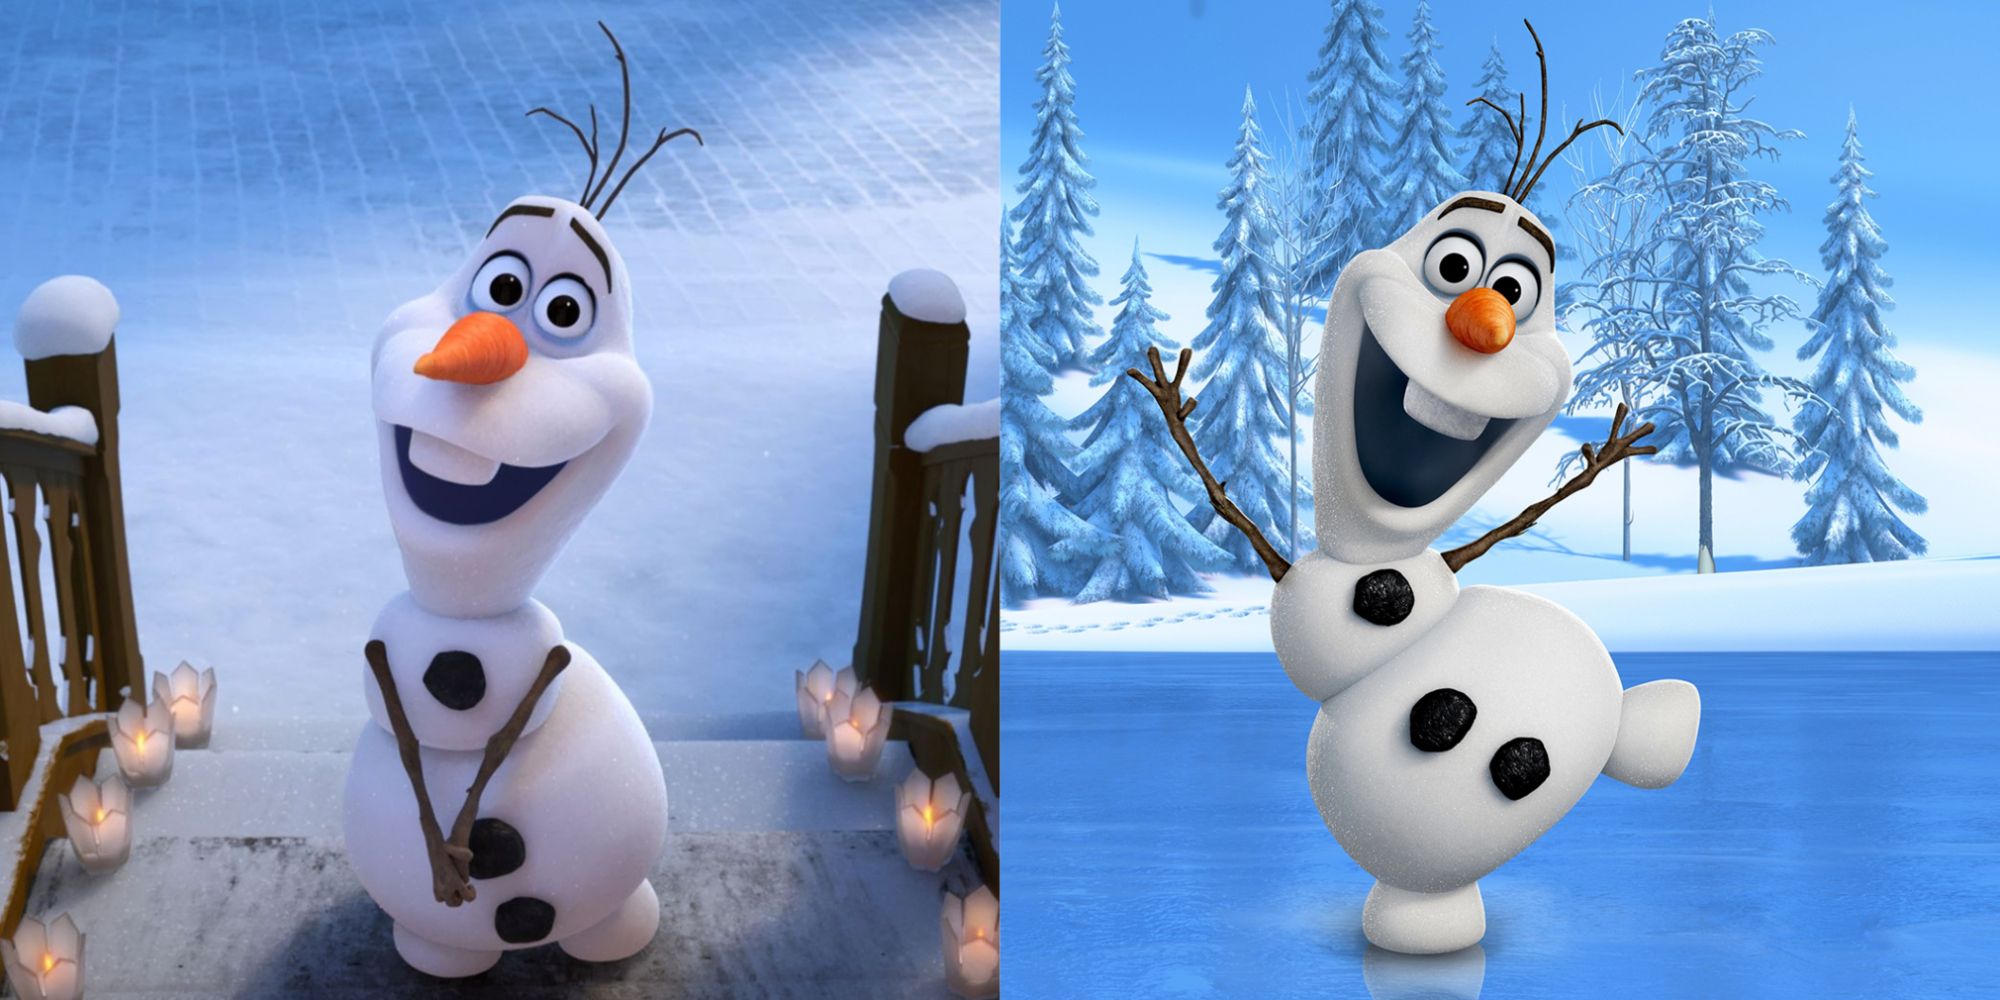 Frozen: Olaf's 15 Greatest Quotes